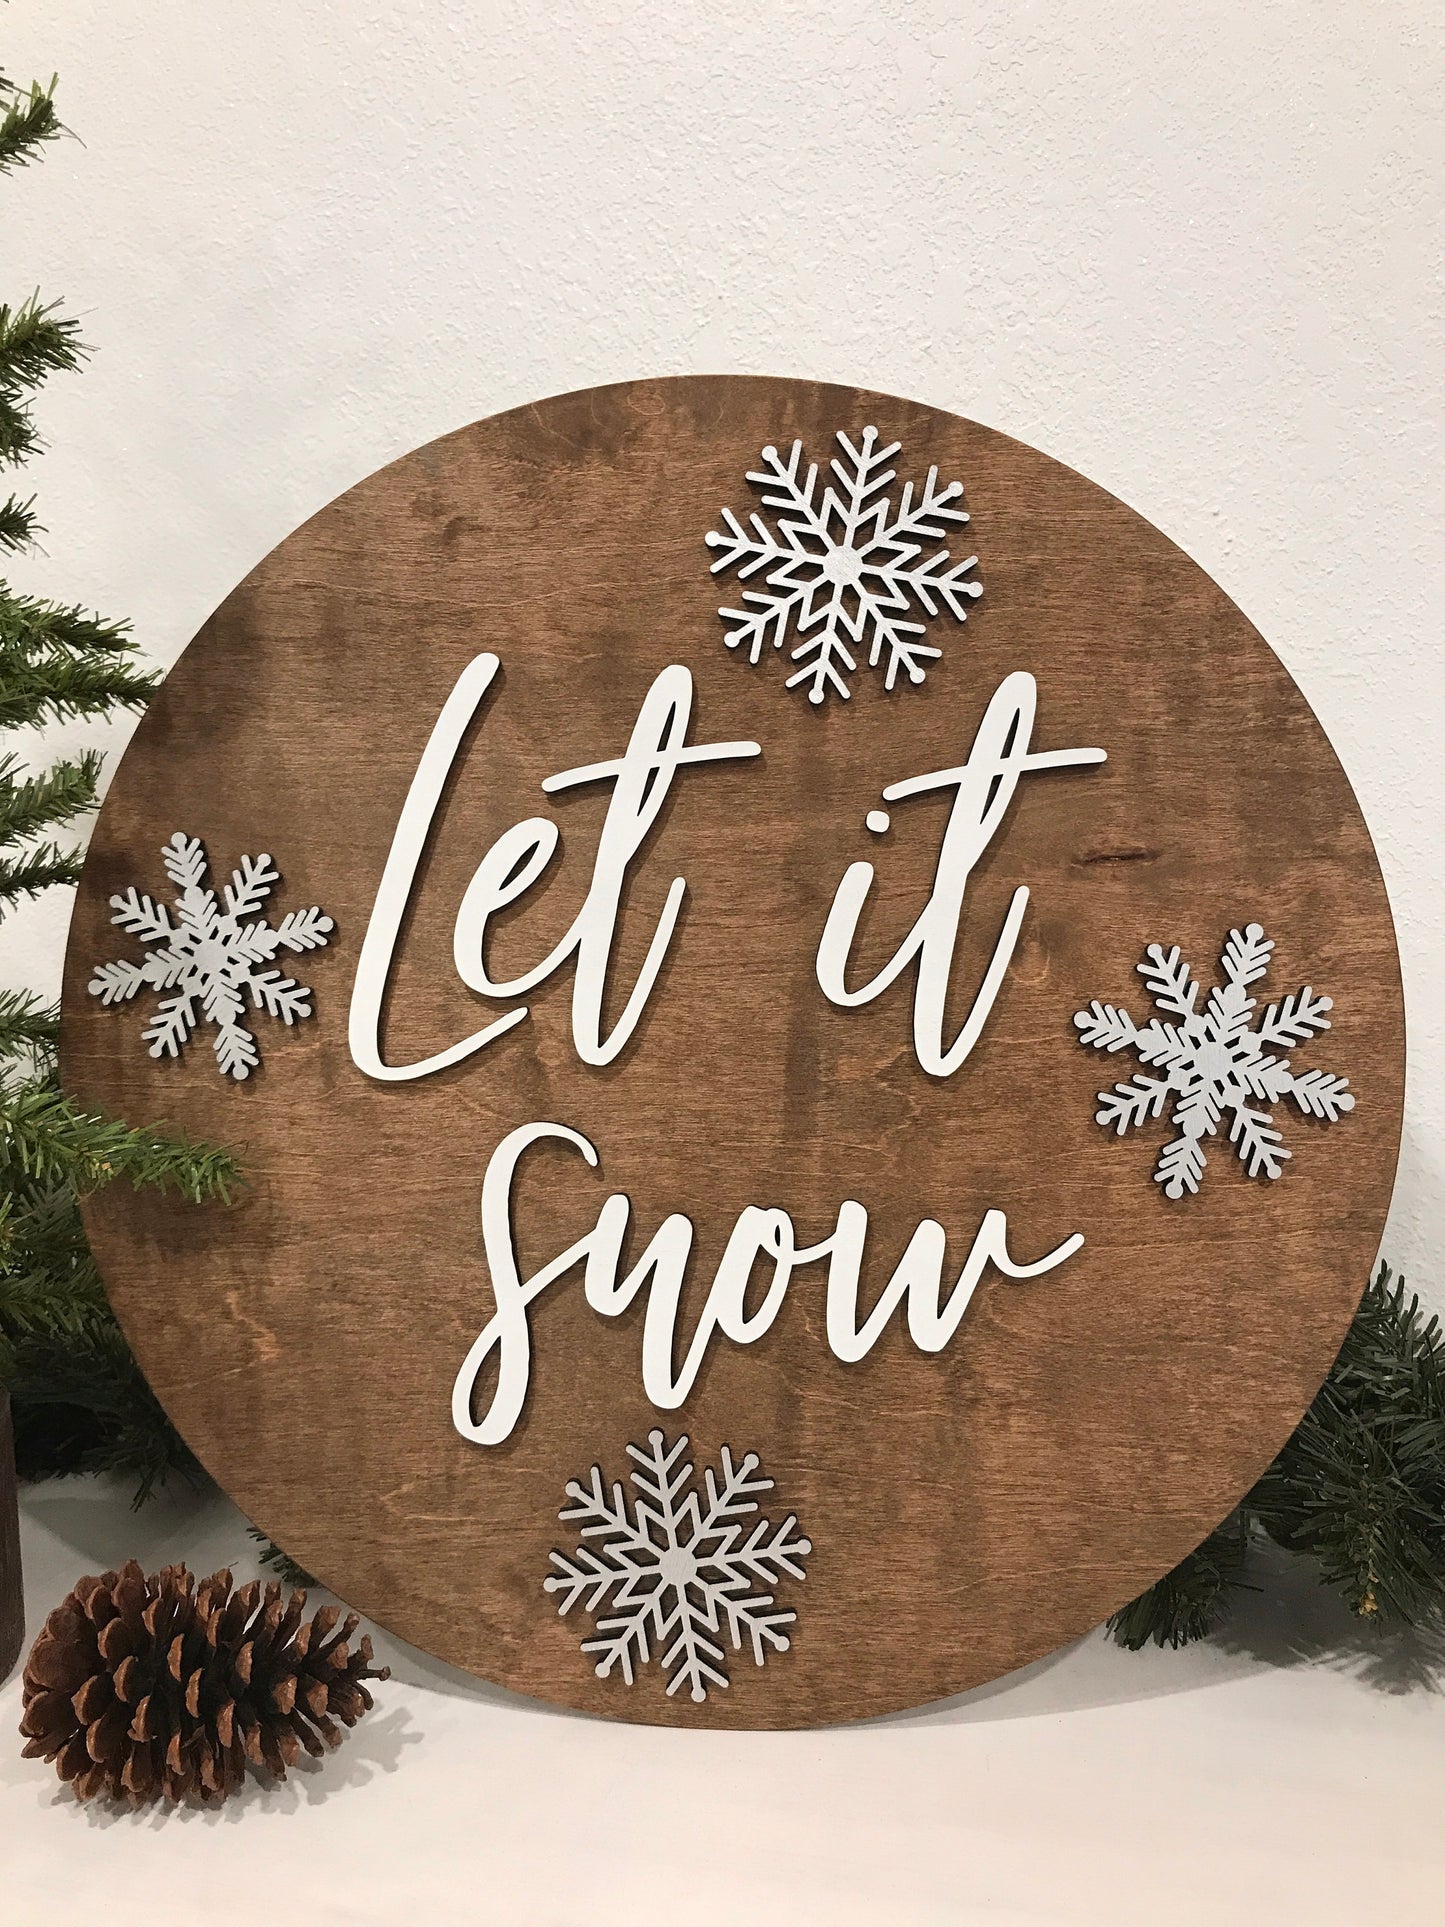 Let it snow sign, Christmas decorations, 3D holiday decor, Snowflakes wood signs, living room wooden sign wall hanging, silver mantel decor